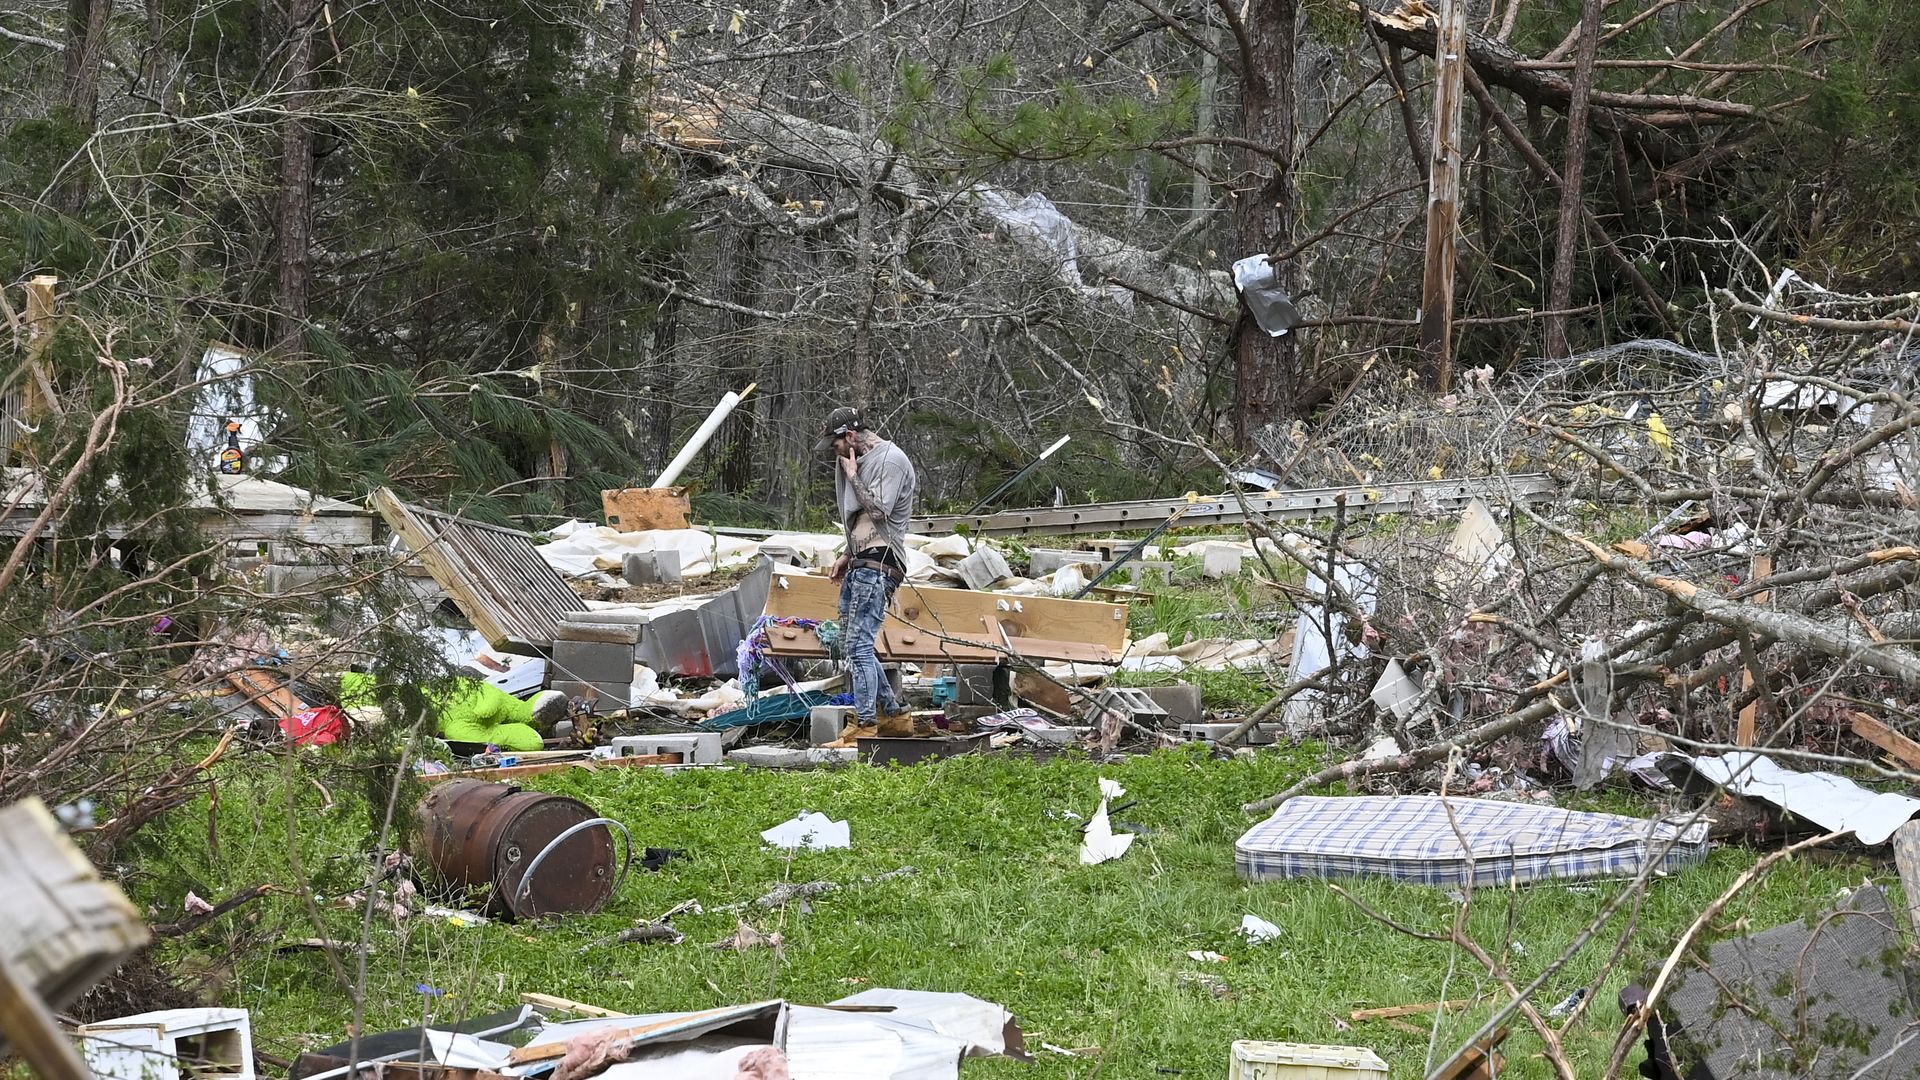 Photo of a person examining damage to a home